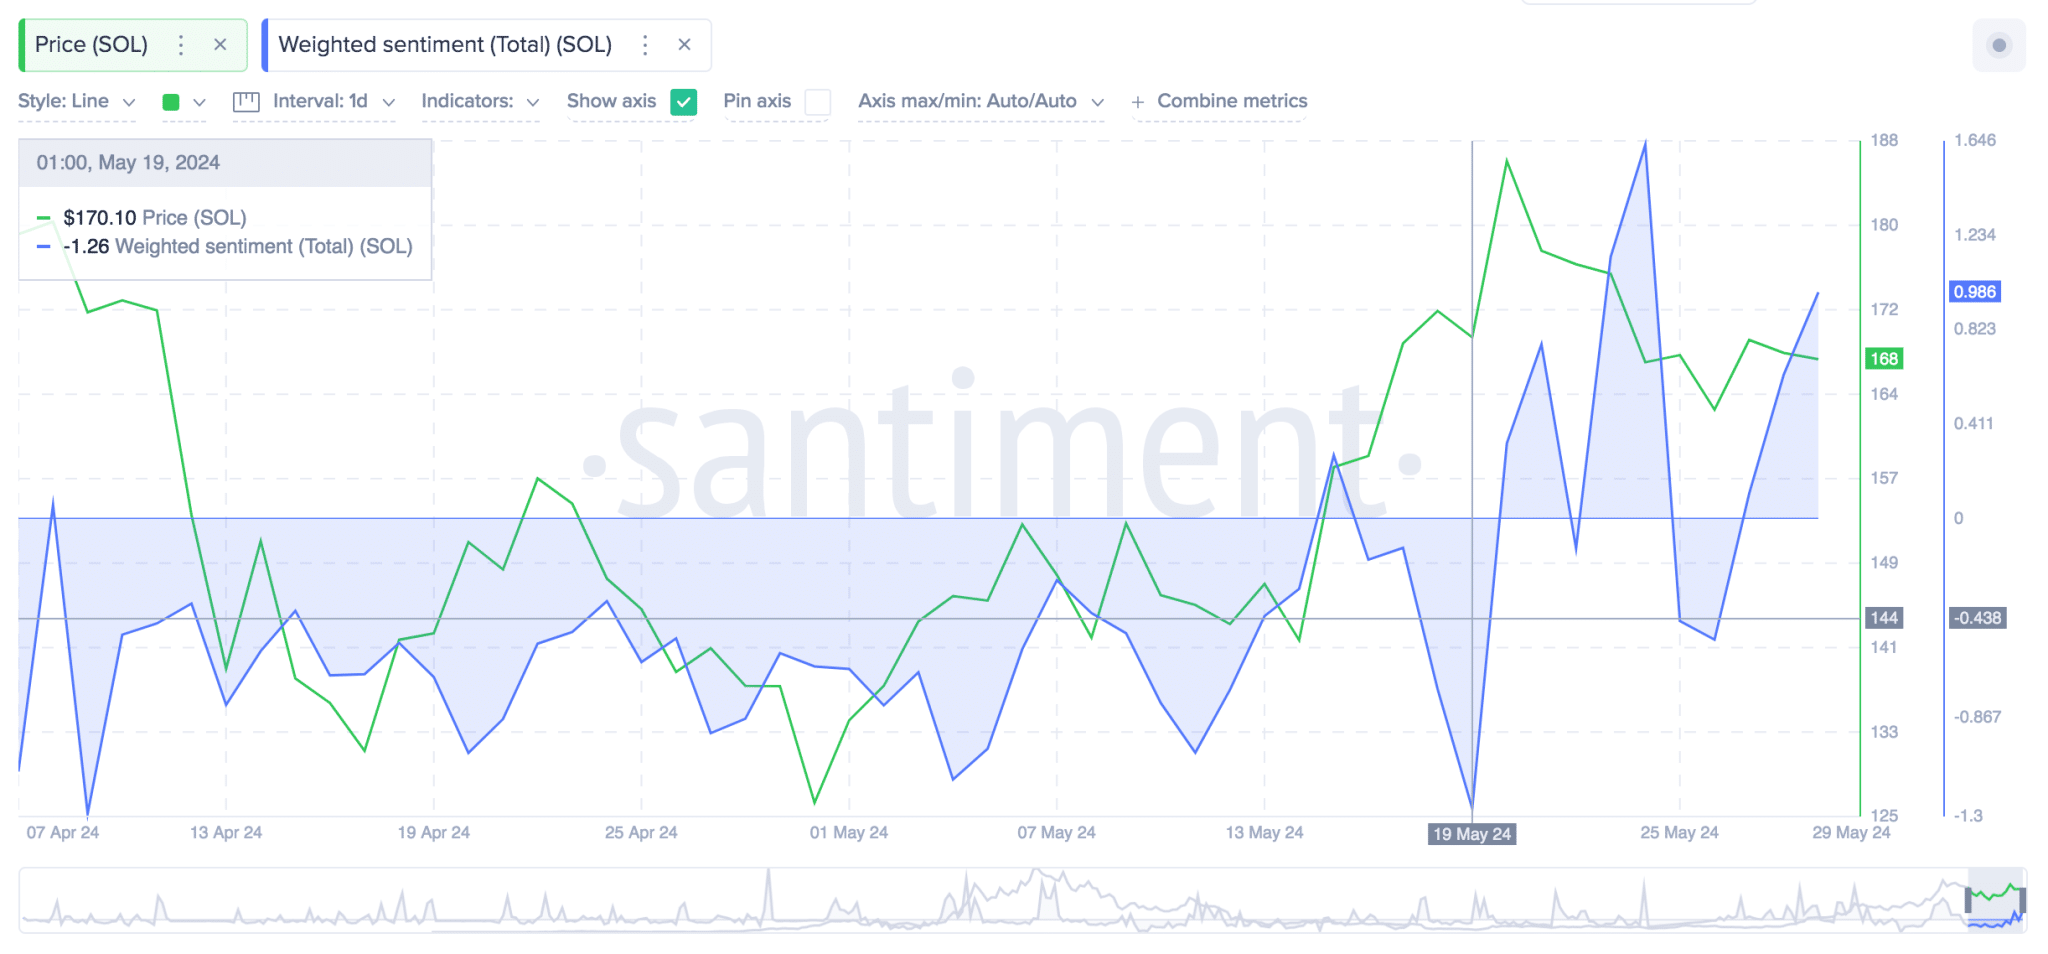 Solana Price vs. SOL Weighted Sentiment 